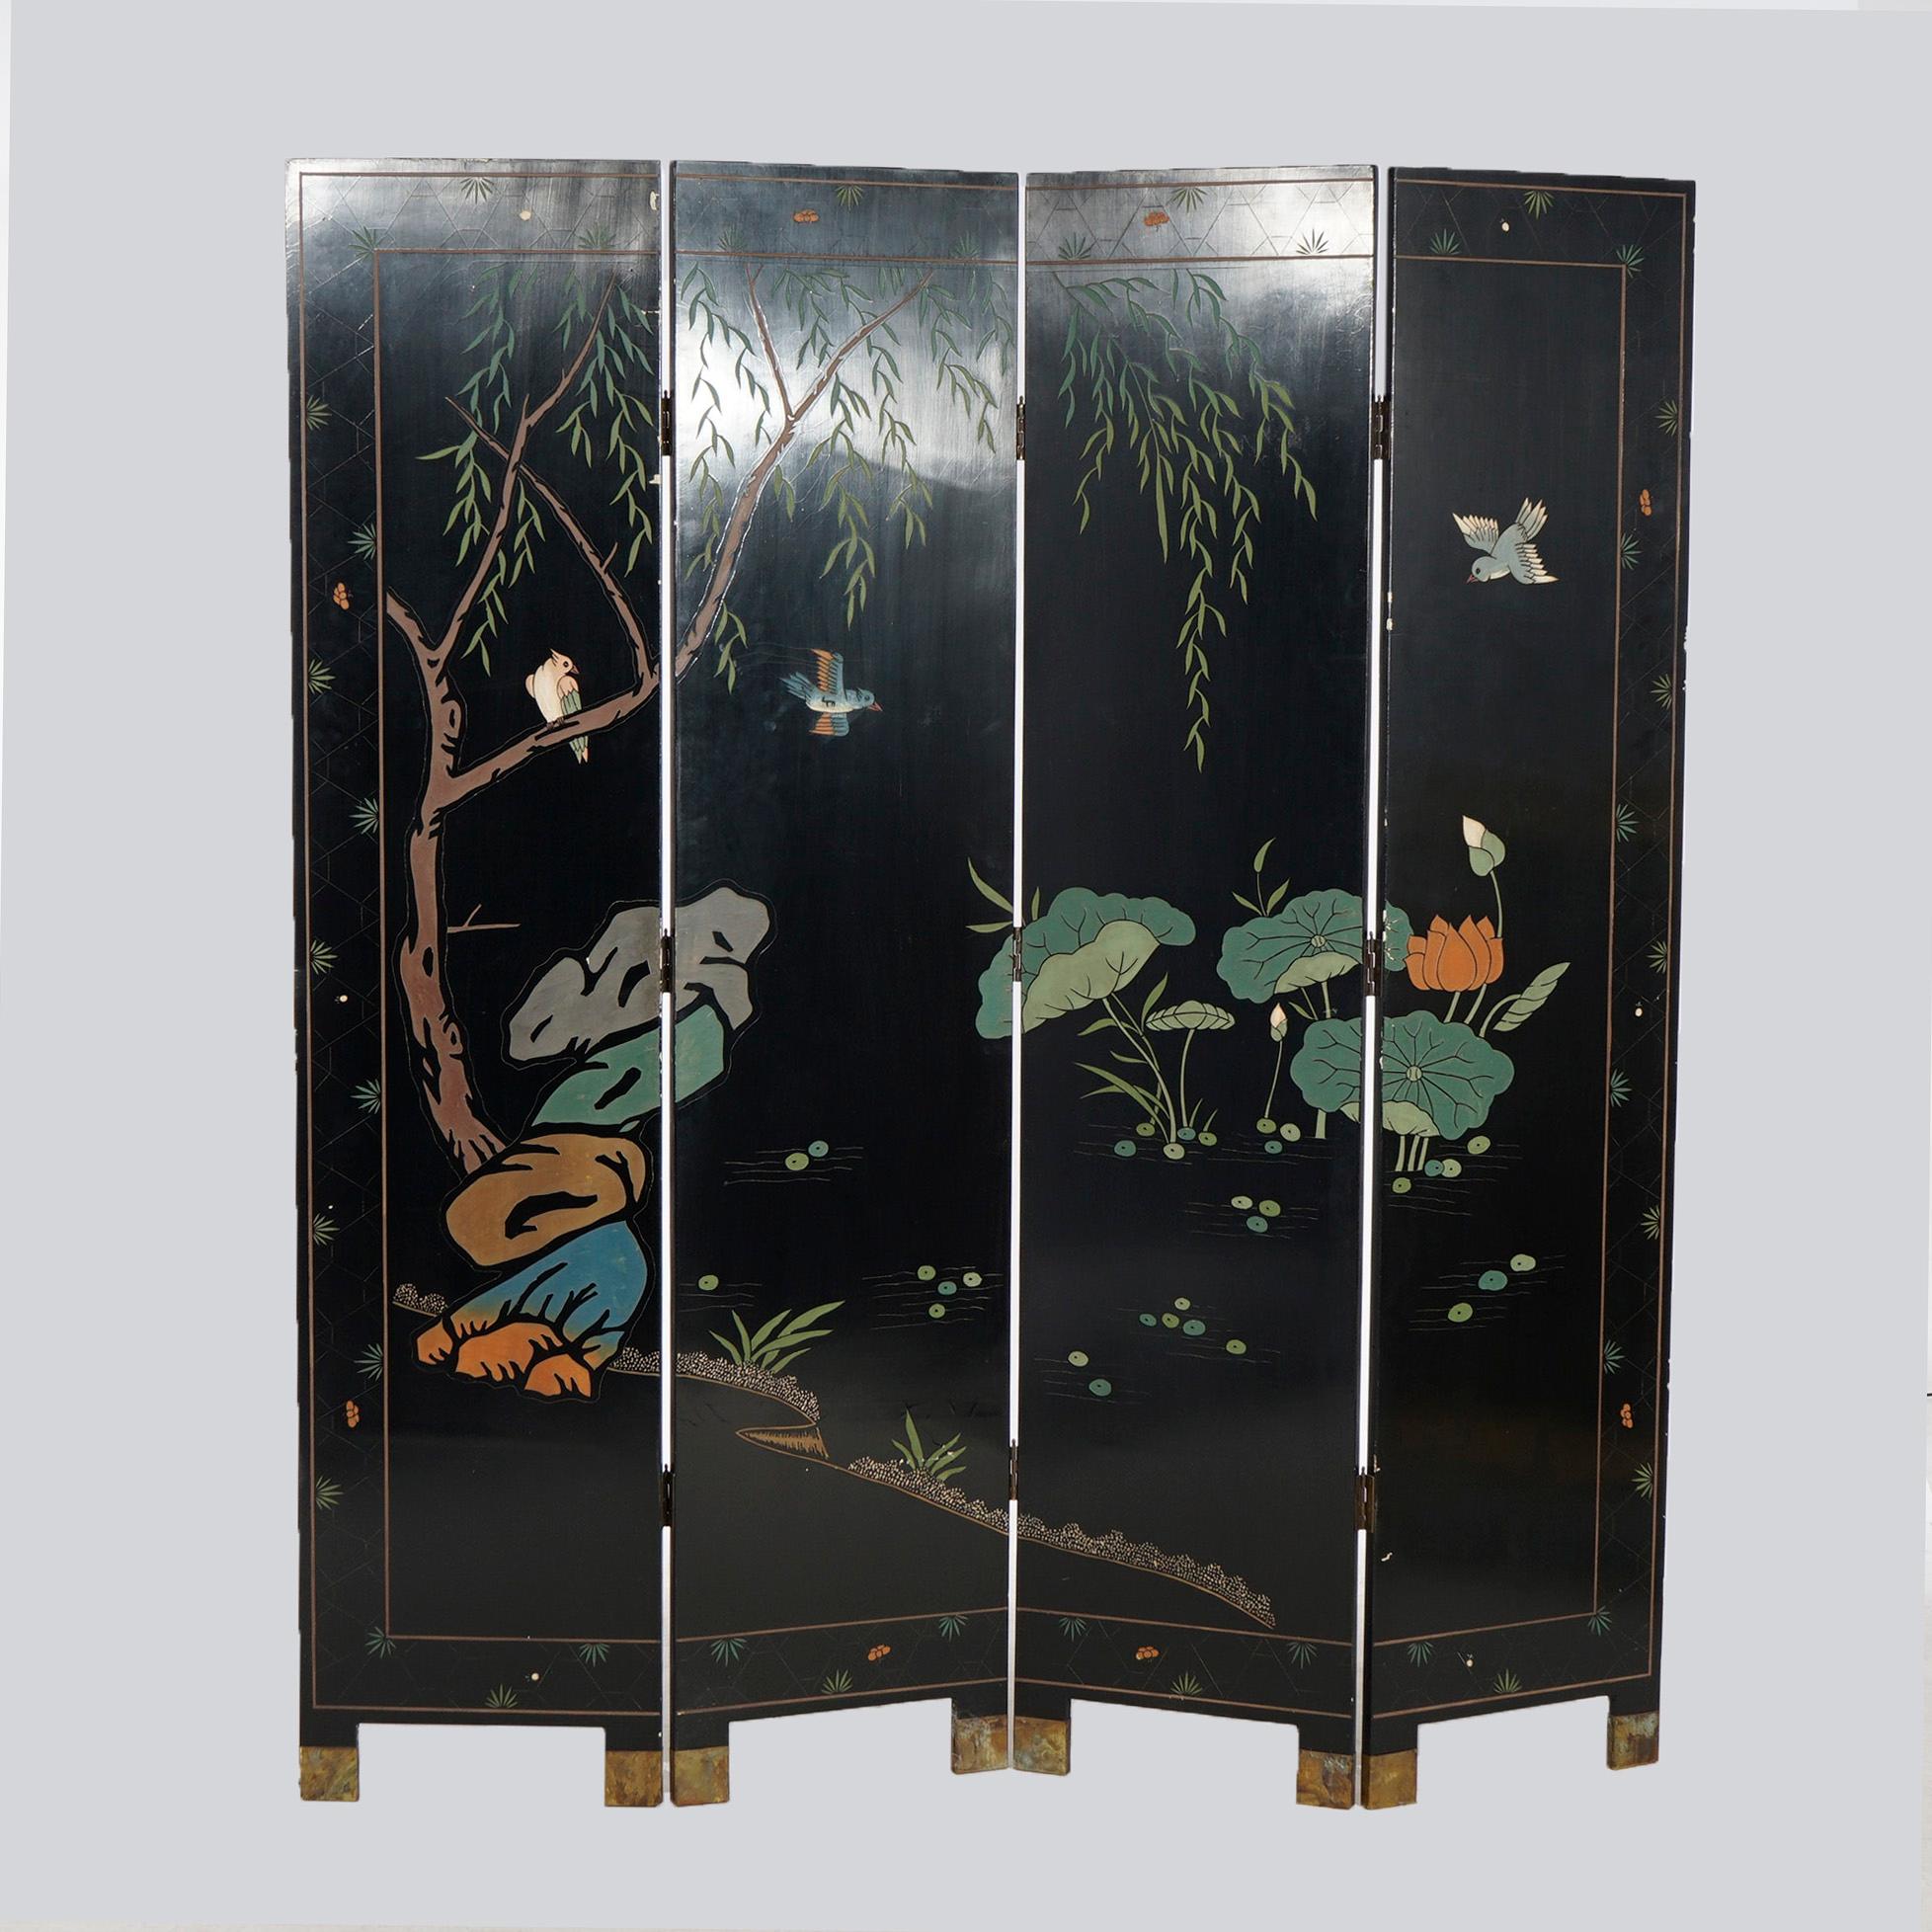 A Chinese dressing screen offers four black lacquered panels having continuous garden scene with flowers and birds, 20th century

Measures- 72''H x 64''W x 1''D.

*Ask about DISCOUNTED DELIVERY rates within 1,500 miles of NY*